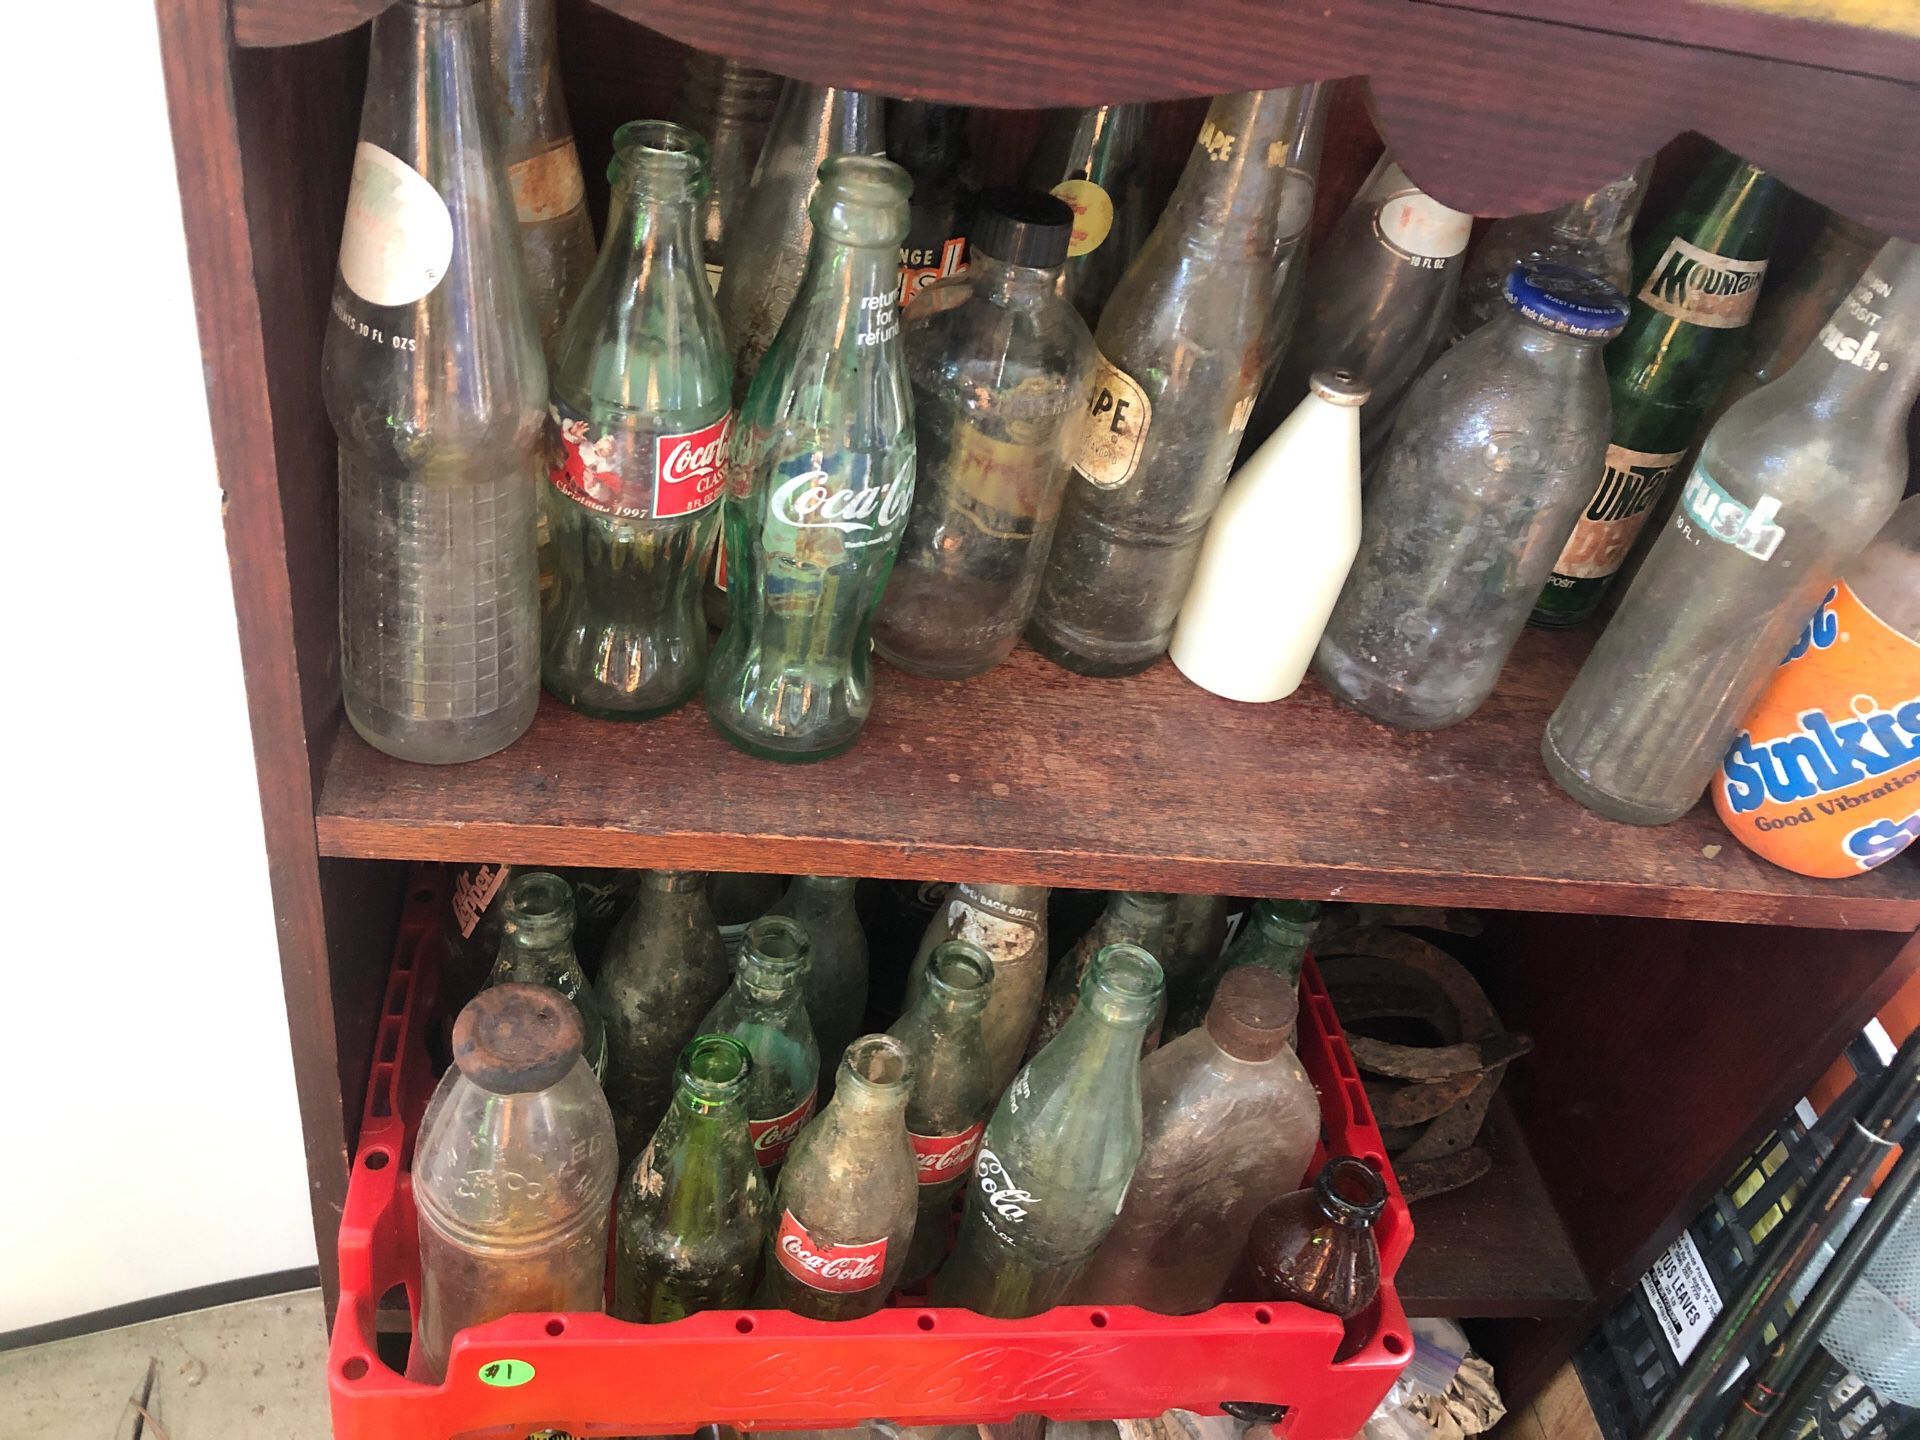 Old license plates and old coke soda bottles ask me about the price